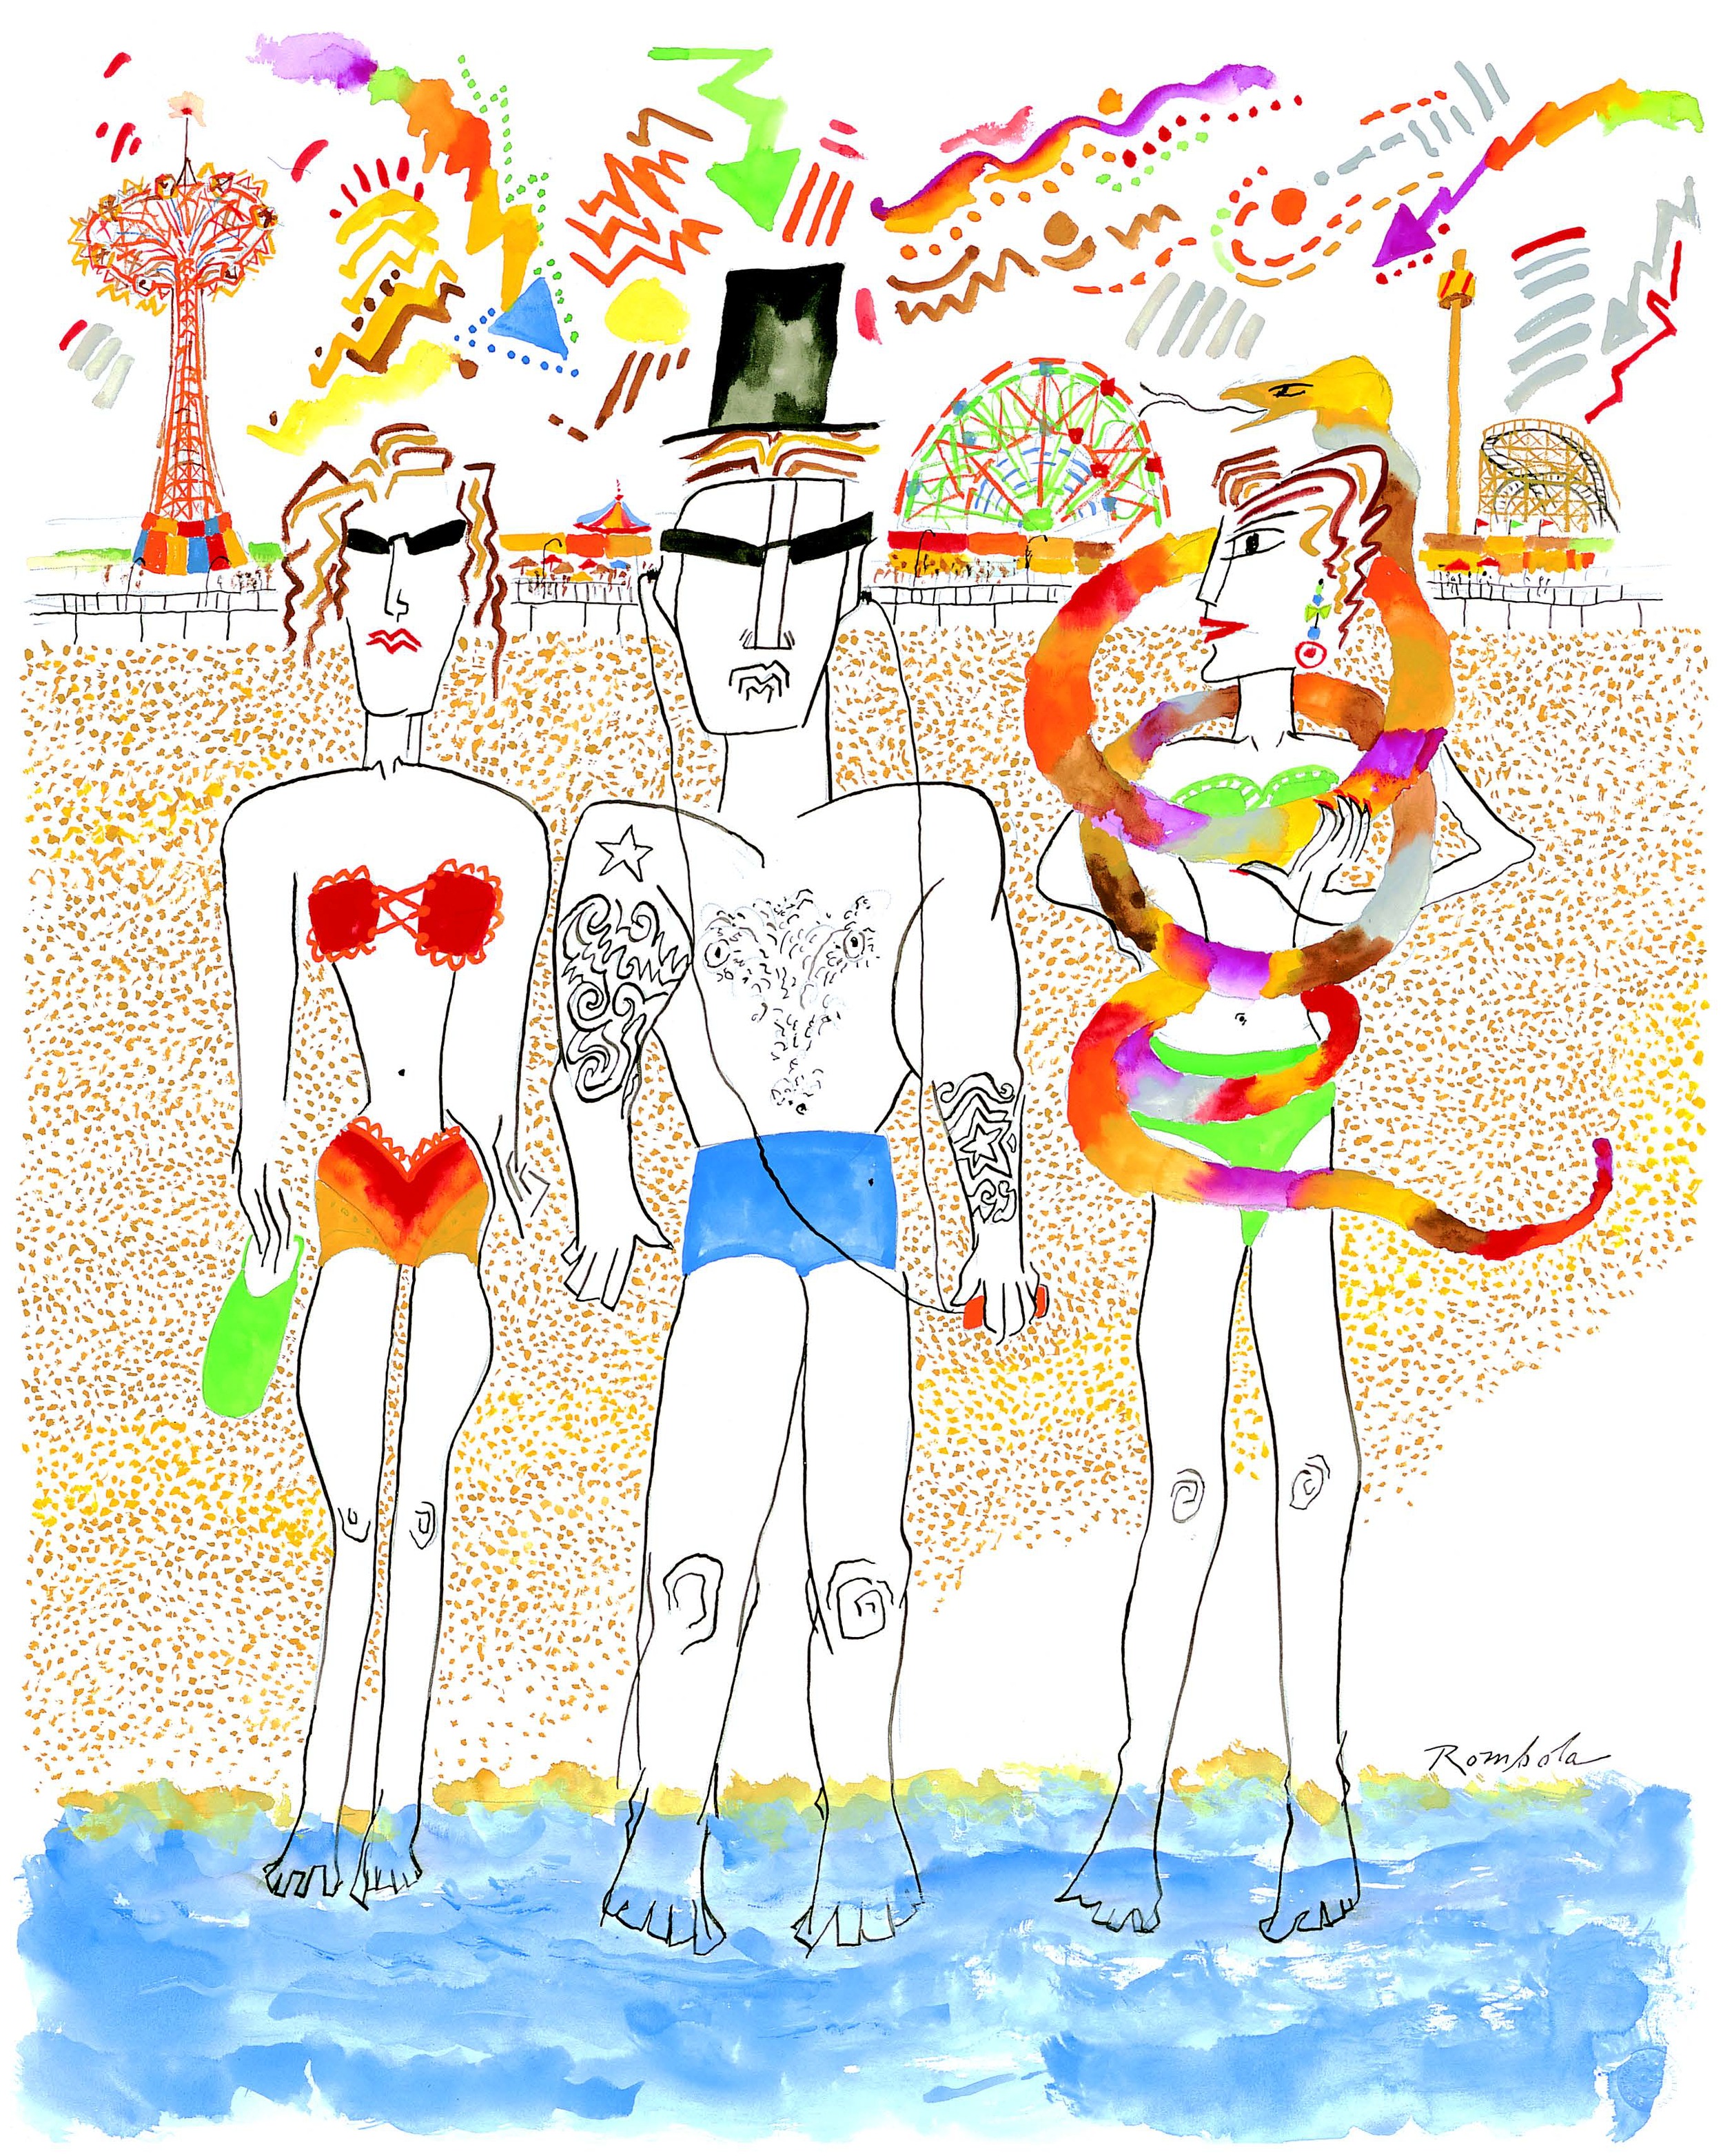   Fun at Coney Island    Gouache and ink on paper 2005   